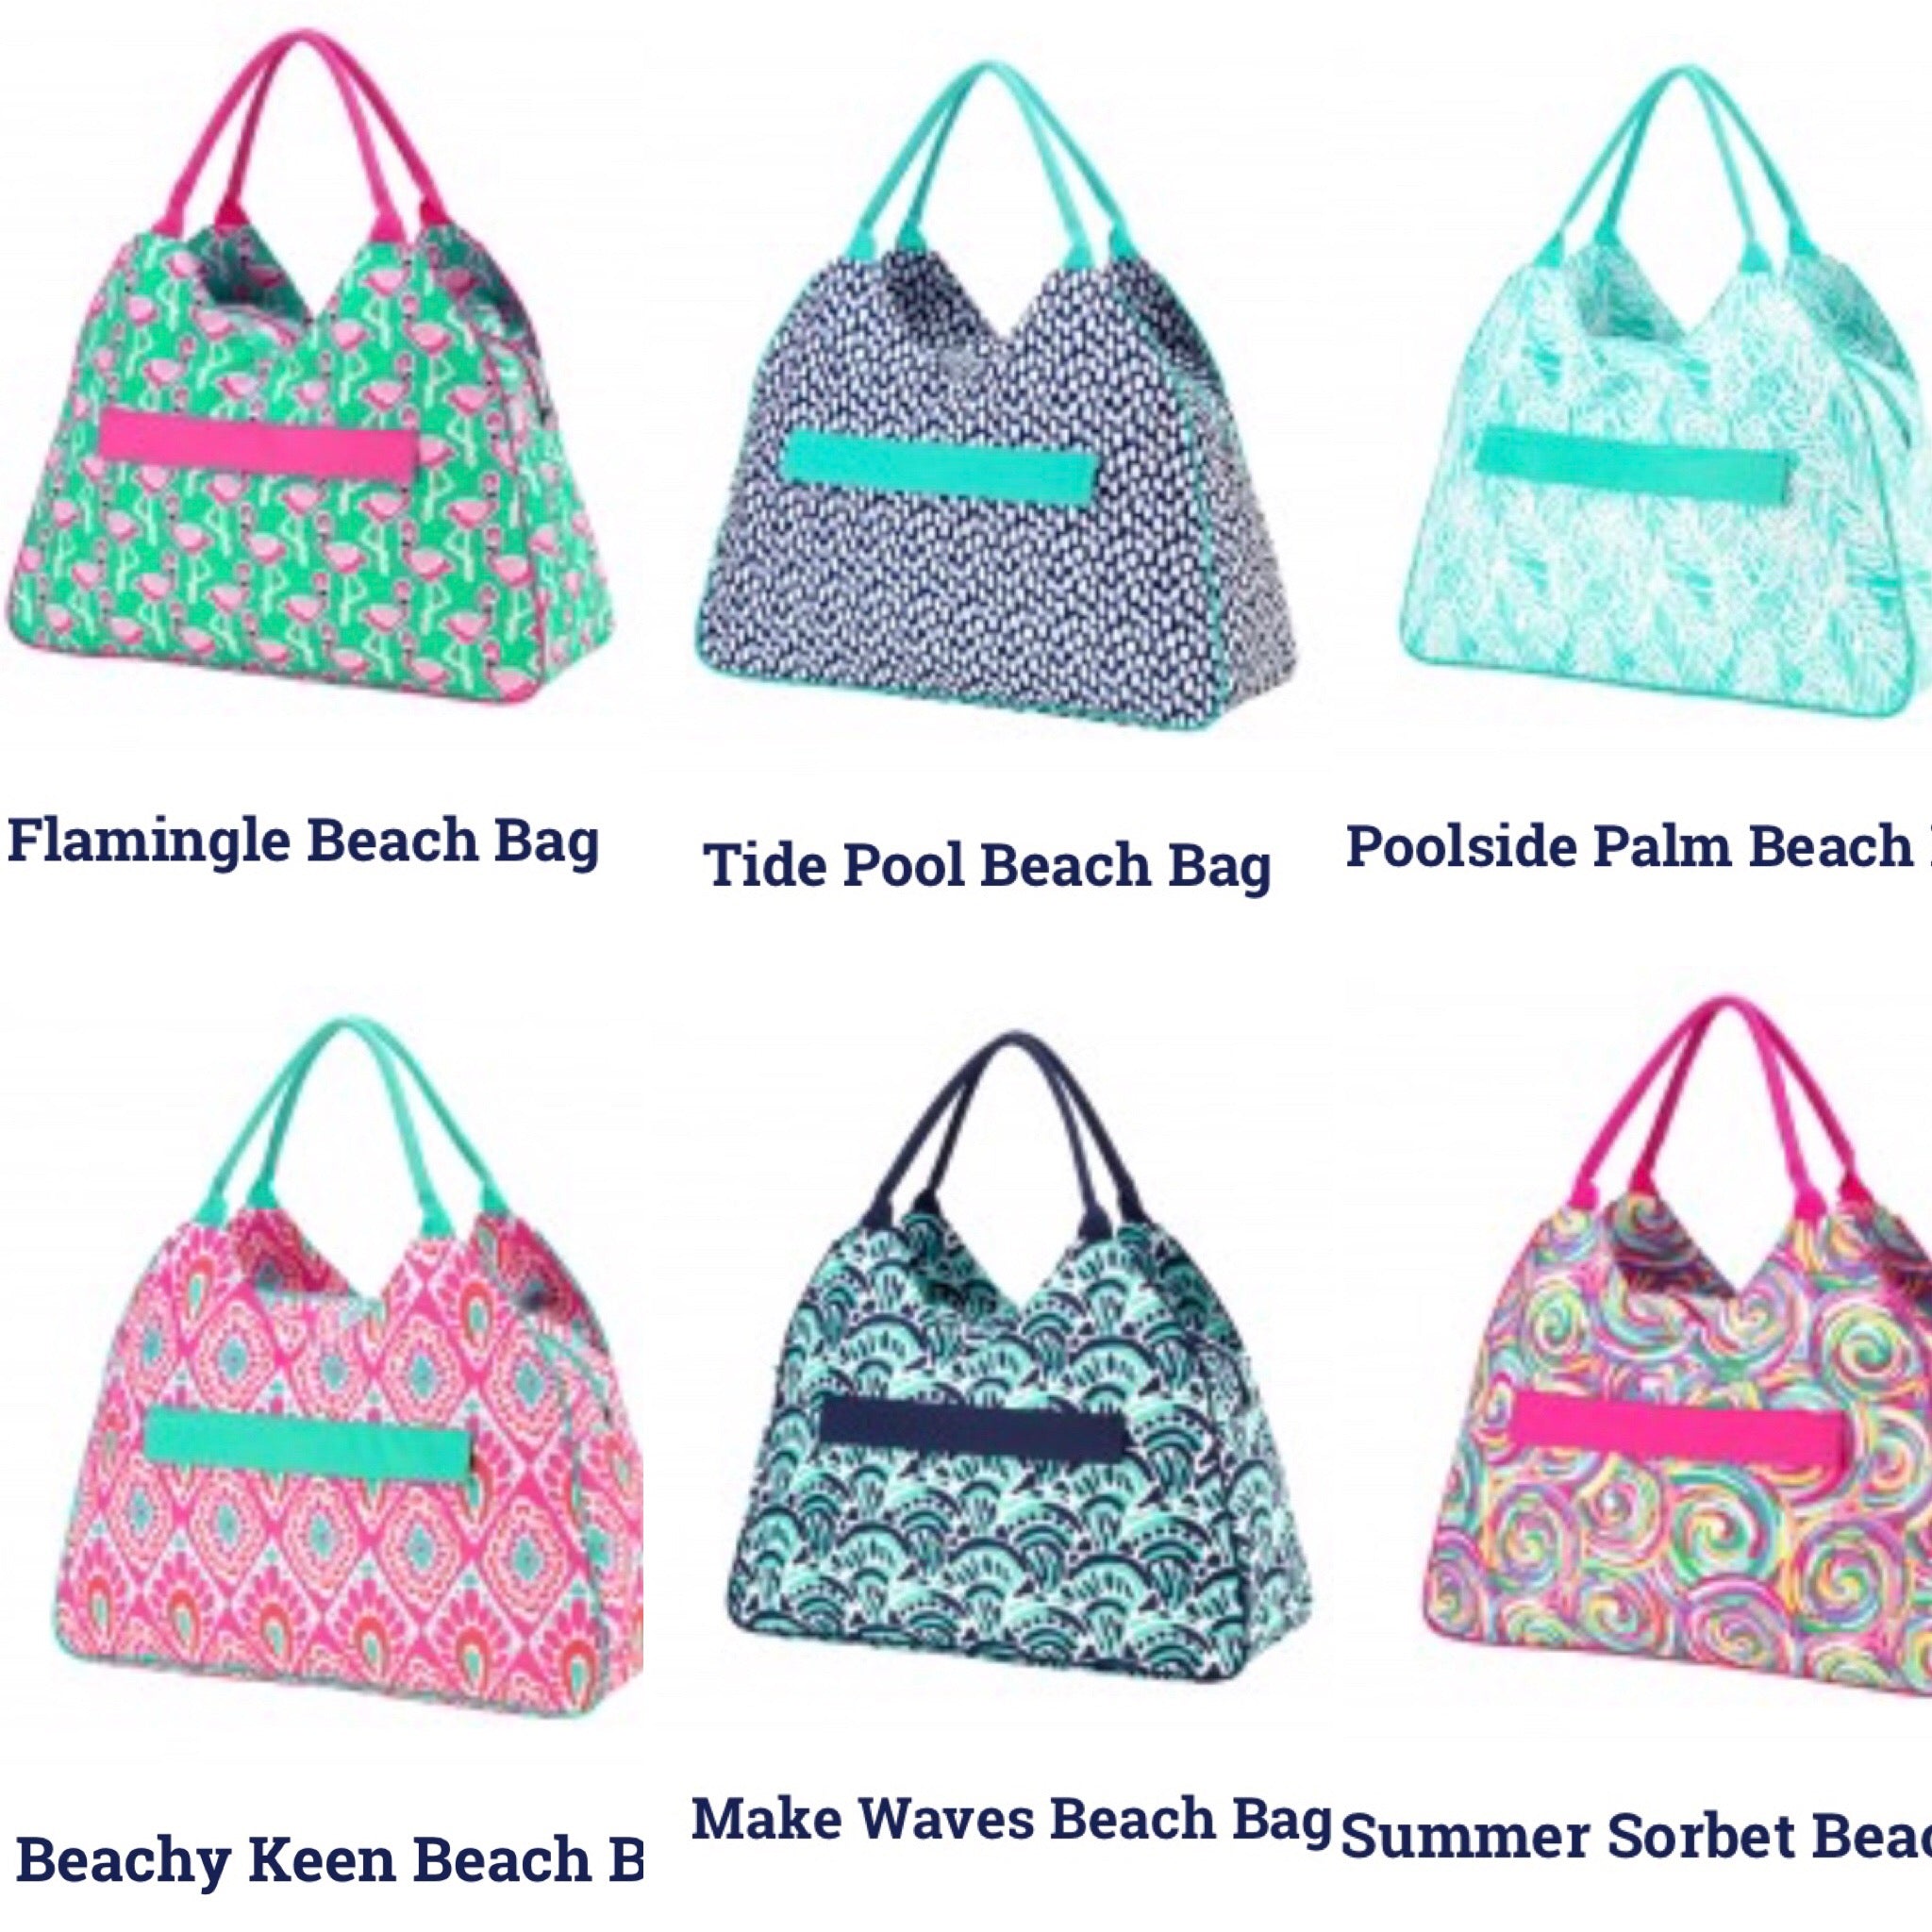 Monogrammed Beach Bag - See dropdown for styles!